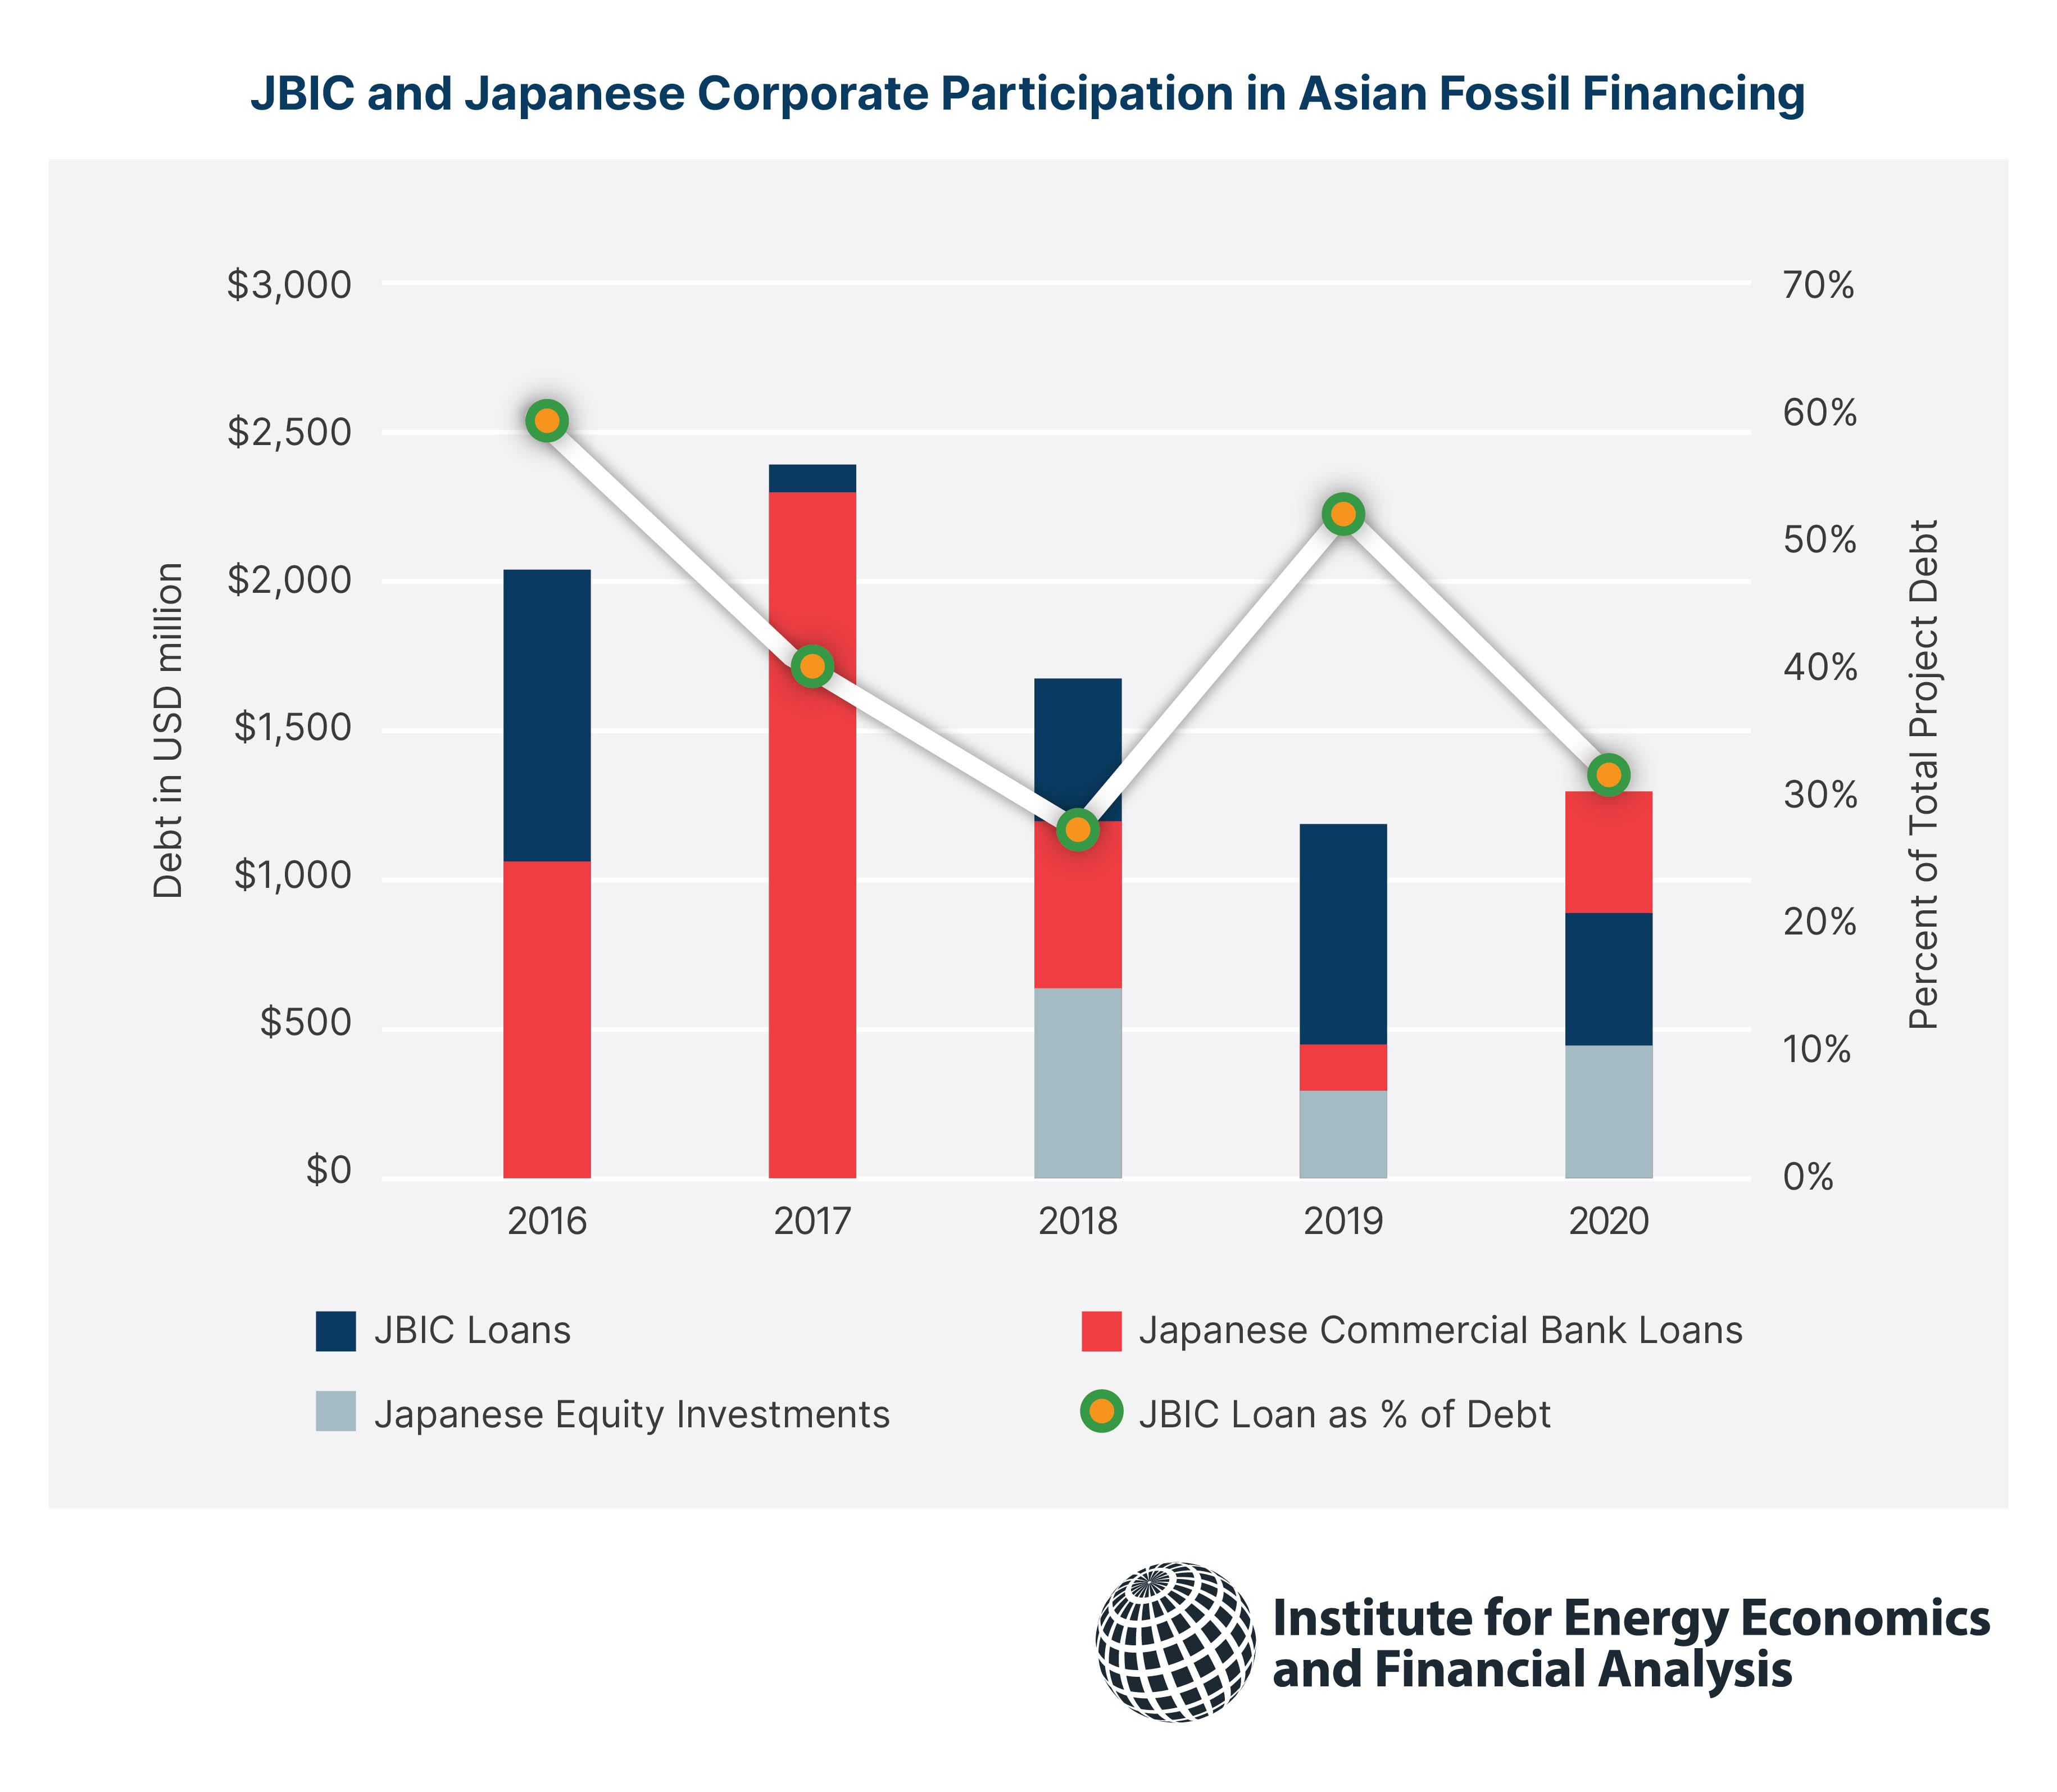 JBIC and Japanese Corporate Participation in Asian Fossil Financing